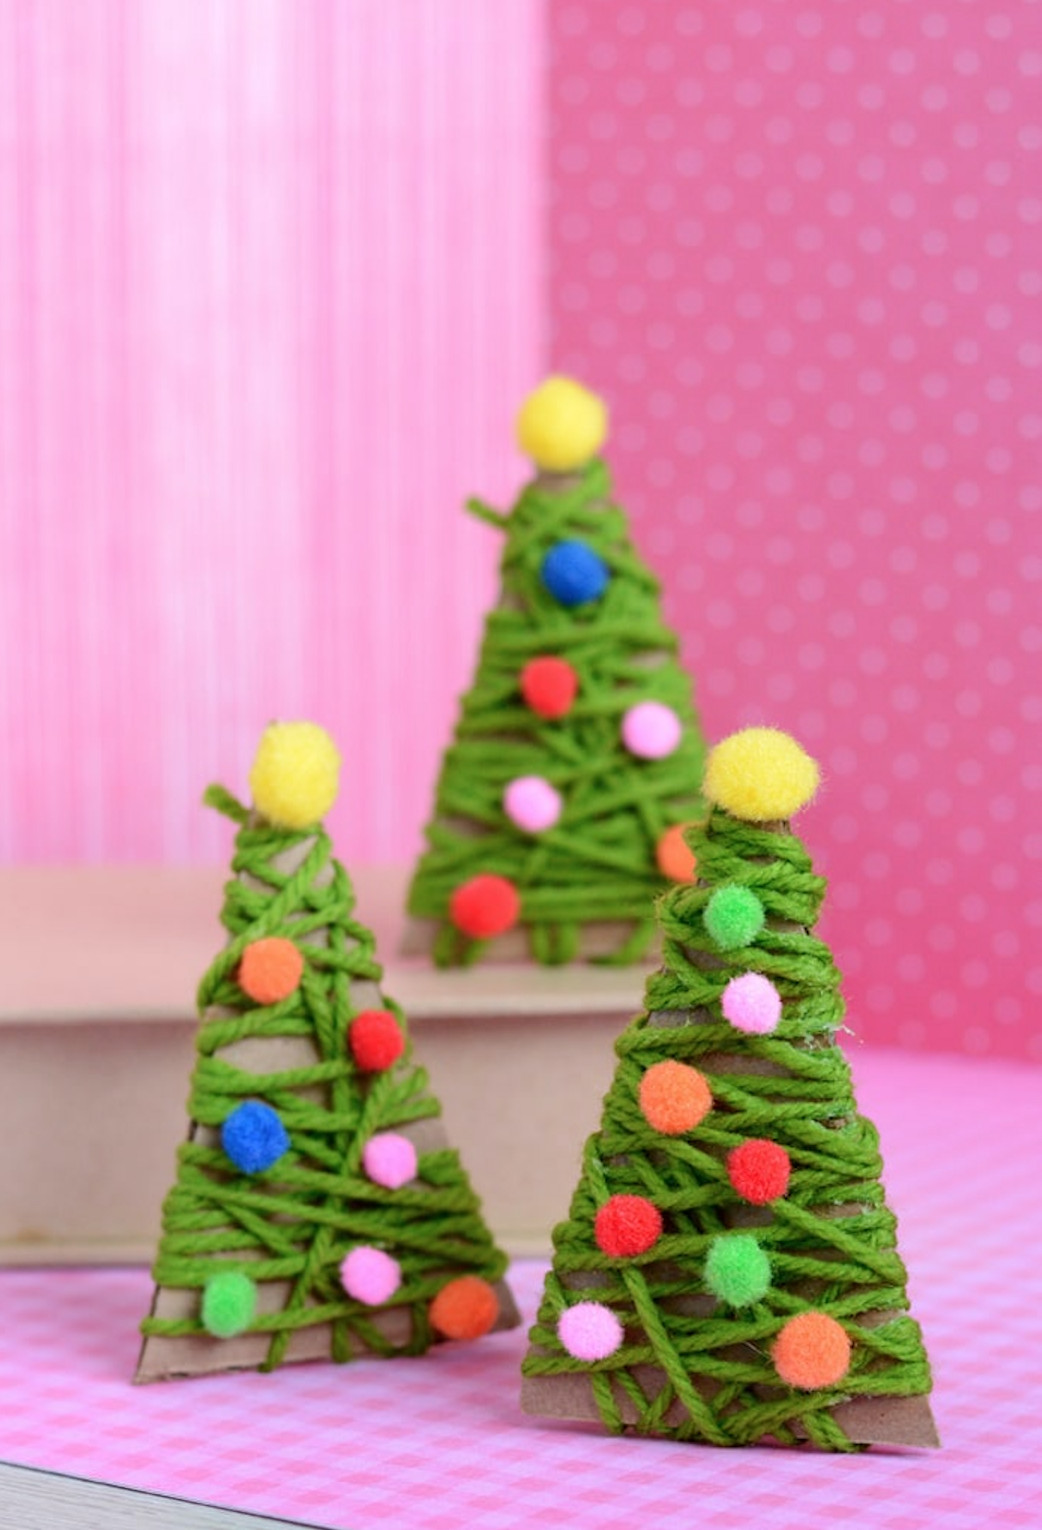 Christmas Crafts To Do With Toddlers
 DIY Christmas Ornament Crafts for Kids A Little Craft In